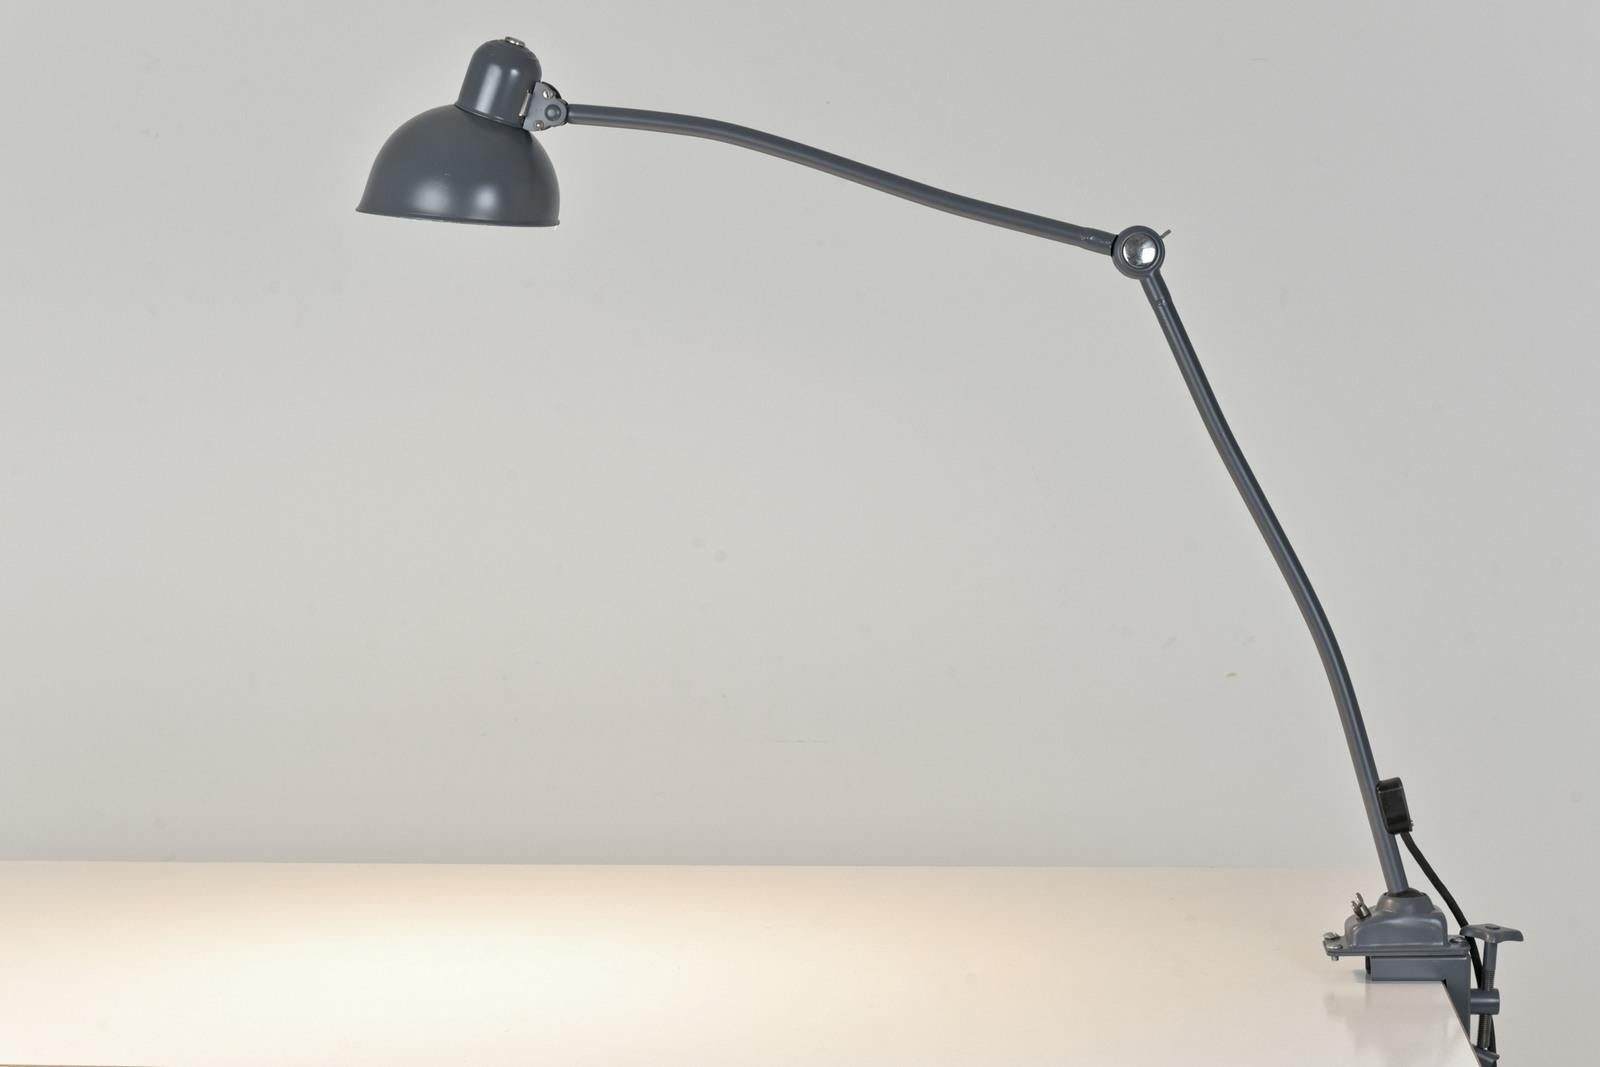 Dimensions: H 75 cm W 100 cm D 16 cm

Material: Iron tubes, sheet iron painted industrial gray, one socket E 27, connection box bakelite, connection cable 3-core textile-sheathed, cord switch, Schuko plug bakelite

Condition: good original